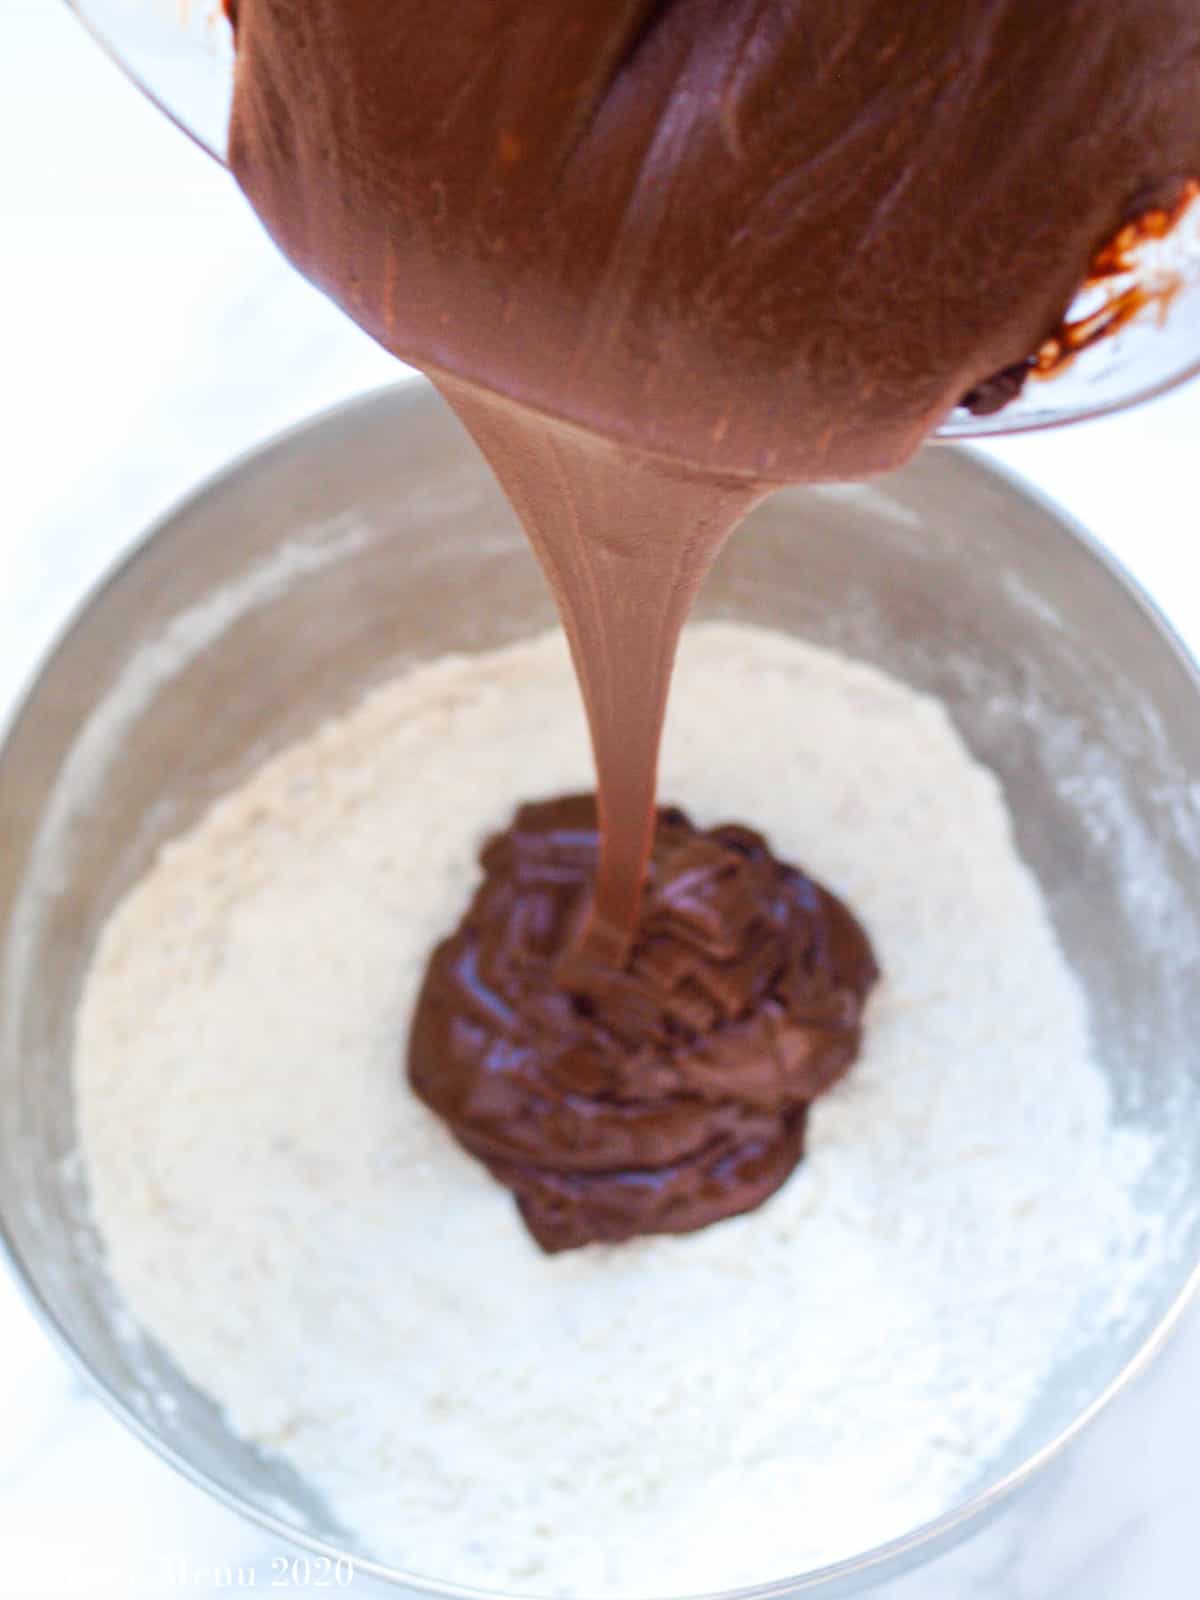 Pouring the melted chocolate mixture into the dry ingredients